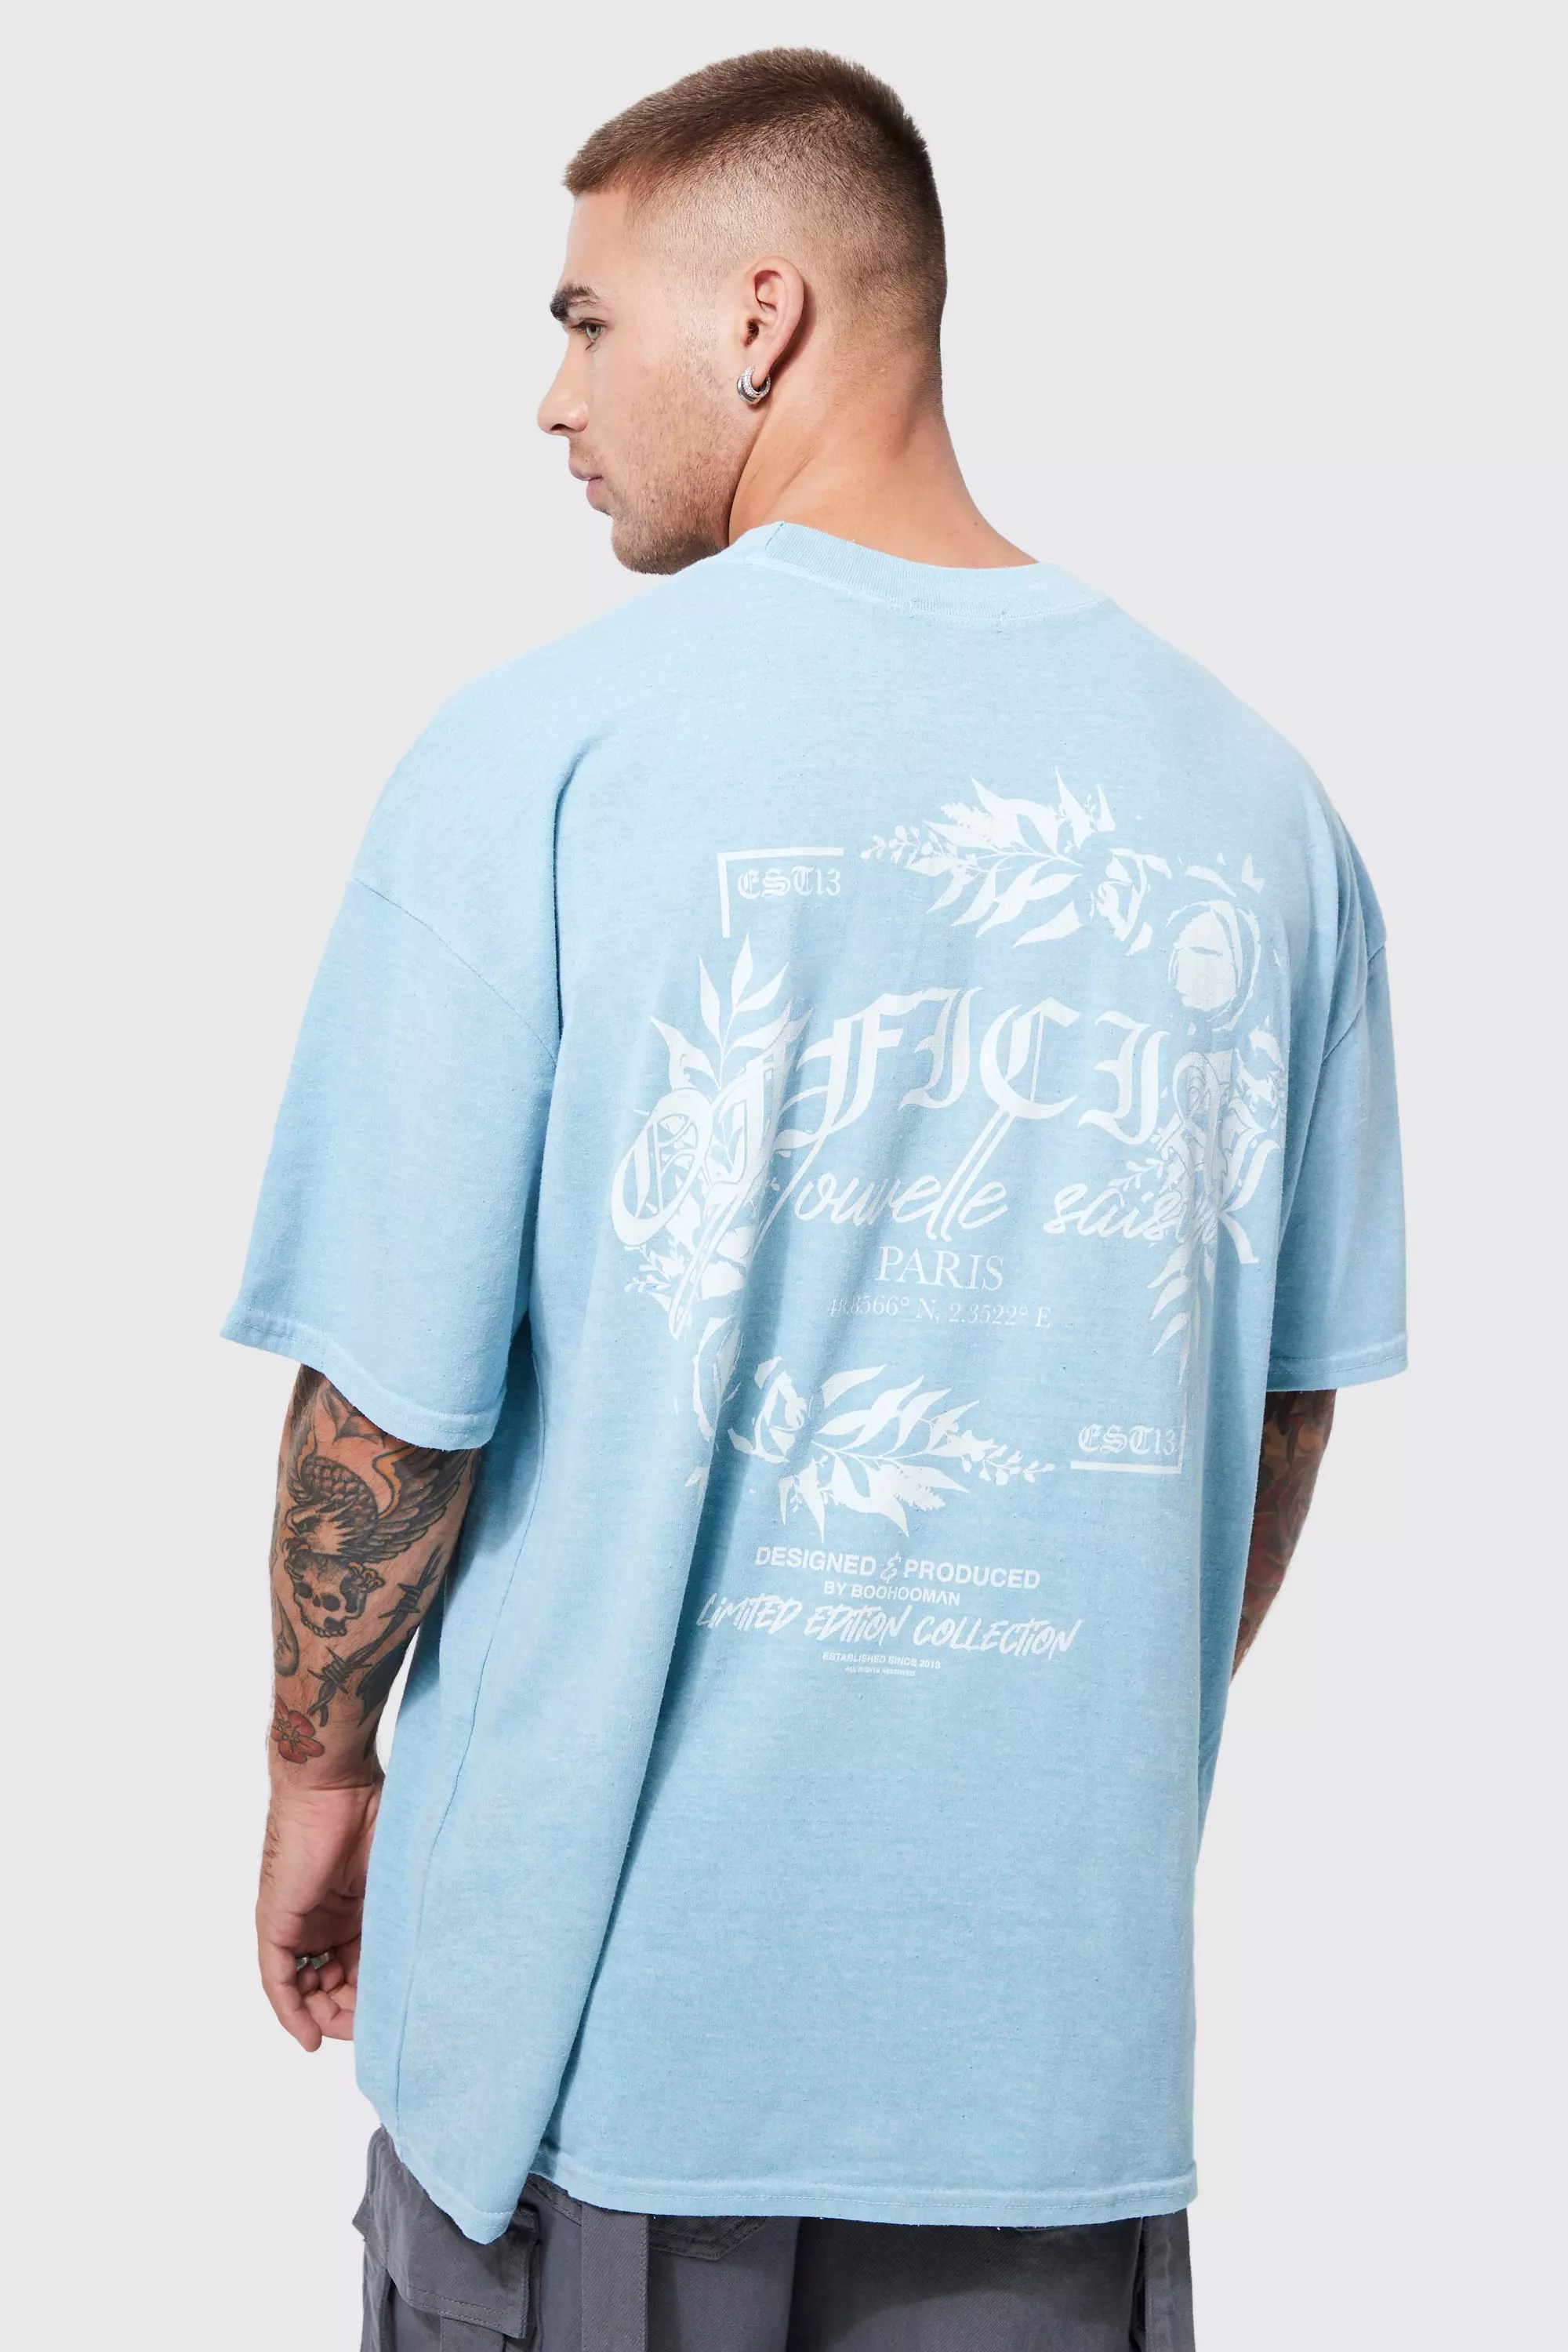 Oversized Official Floral boohooMAN T-shirt | Graphic USA